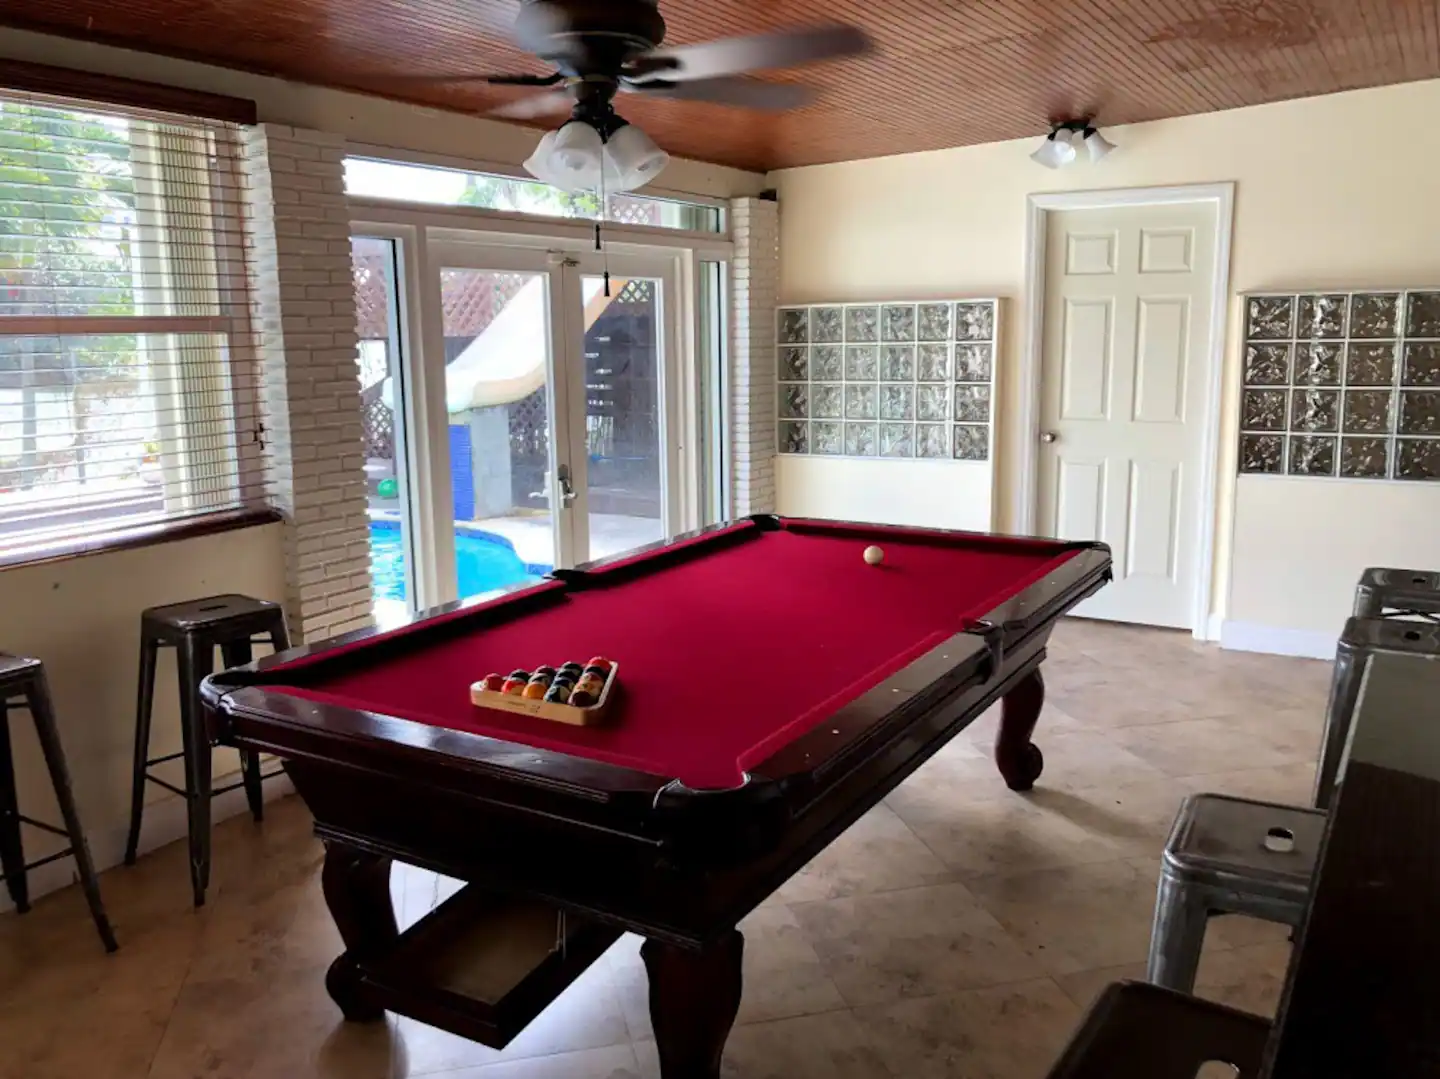 Game Room with Billiards Table overlooking Pool & Patio Area.
